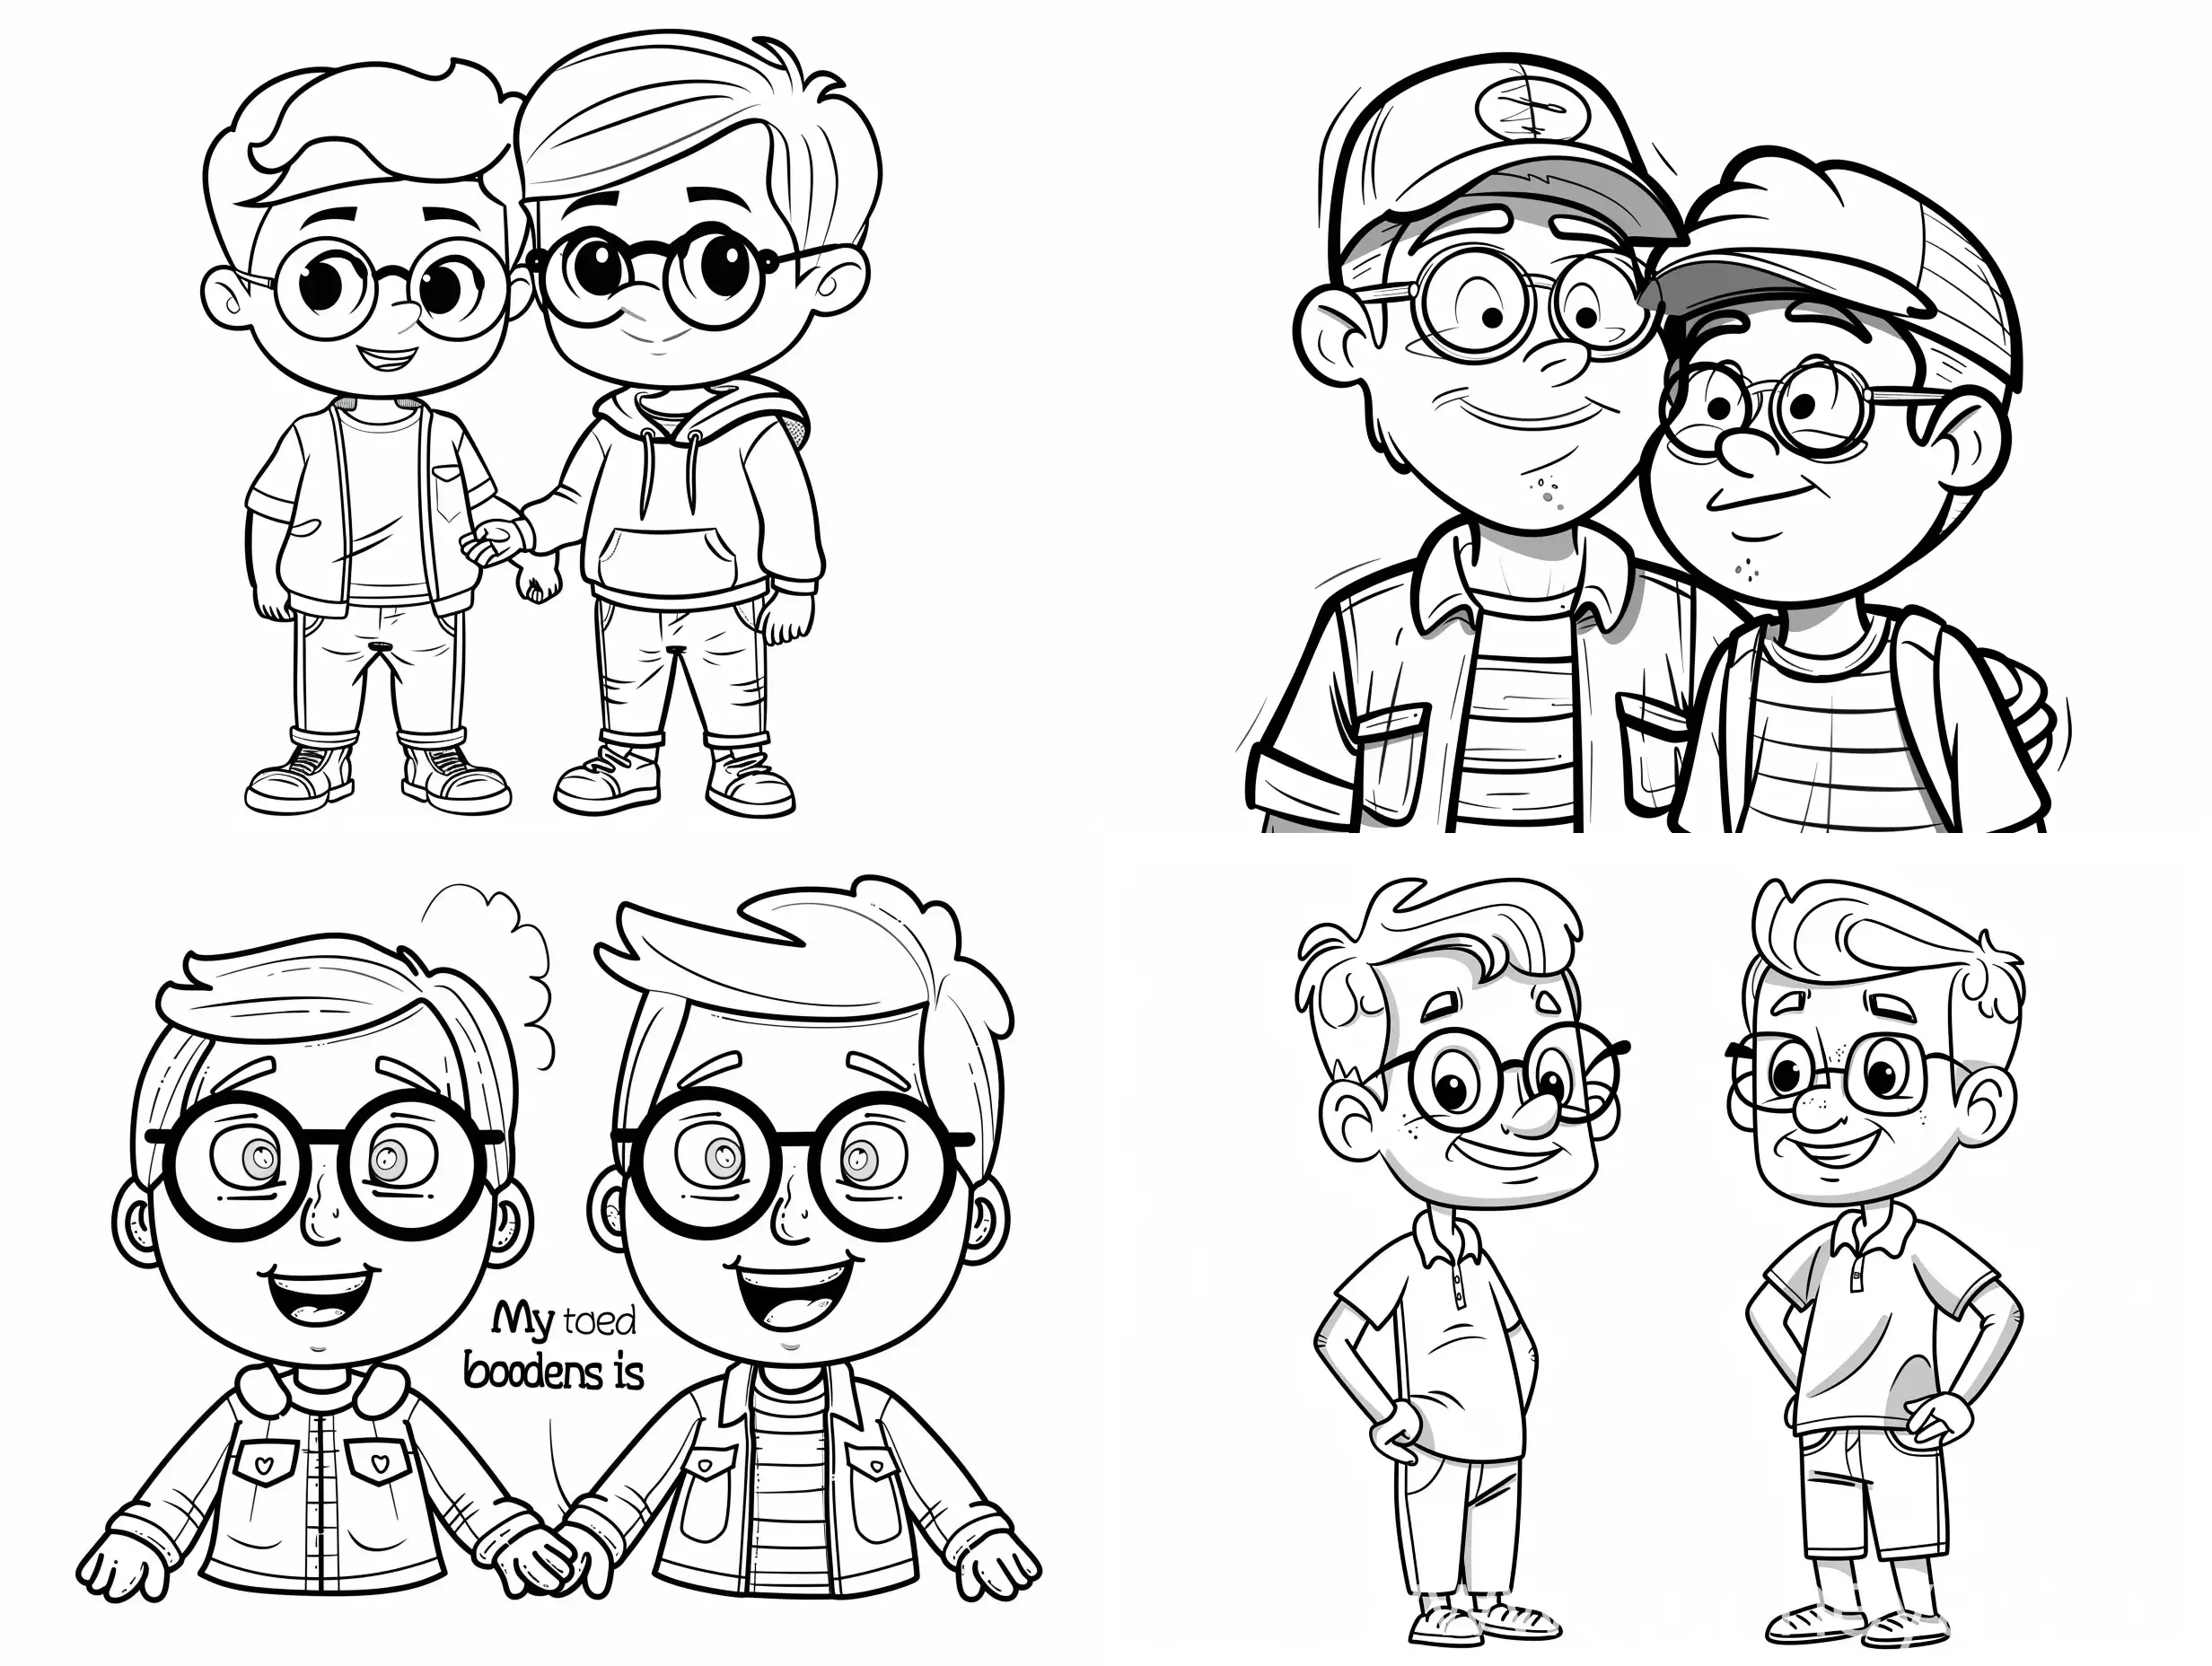 coloring page for kids,low detailed, simply cartoon style, isolated, funny, My older brother is cool